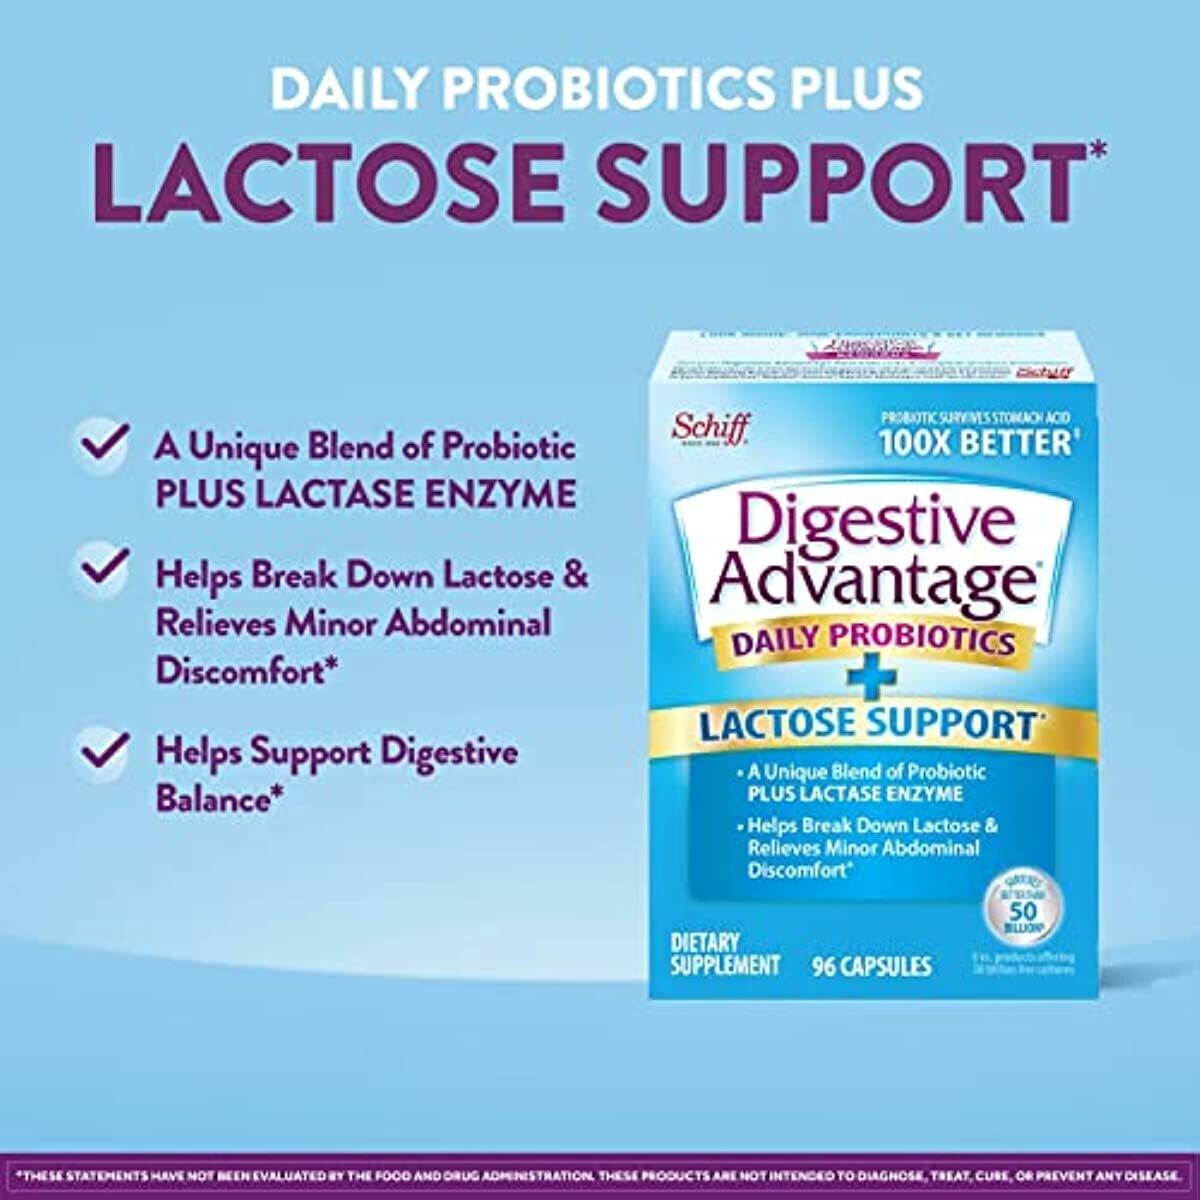 Digestive Advantage Lactose Defense with Lactase Enzymes & Probiotics For Digestive Health, Support for Breaking Down Lactose, Minor Abdominal Discomfort & Gut Health, 96ct Capsules